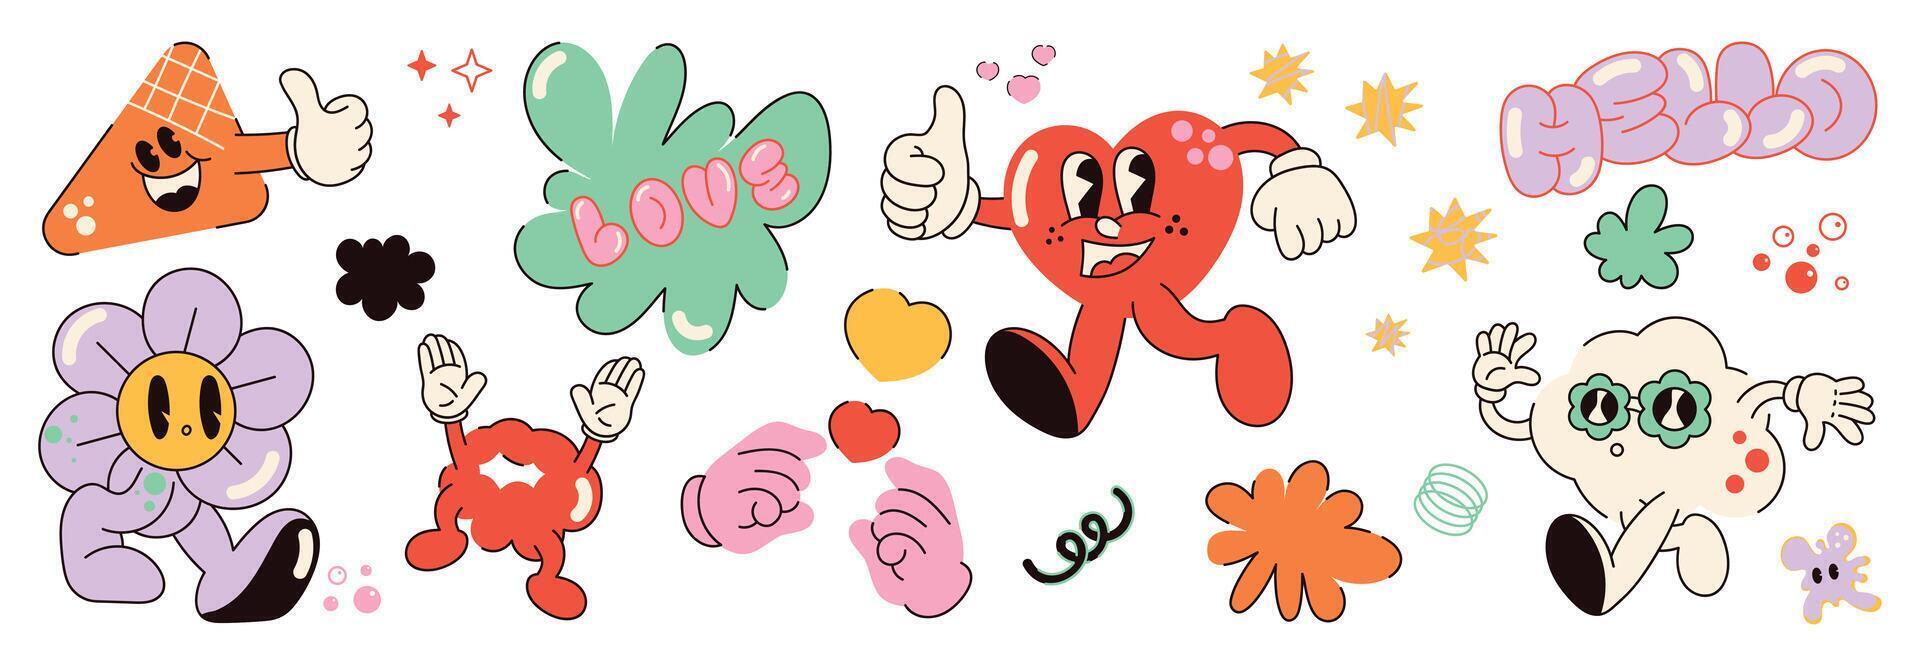 Set of funky groovy element vector. Collection of cartoon characters, doodle smile face, flower, heart, cloud, bubble, hello. Cute retro groovy hippie design for decorative, sticker, kids, clipart. vector